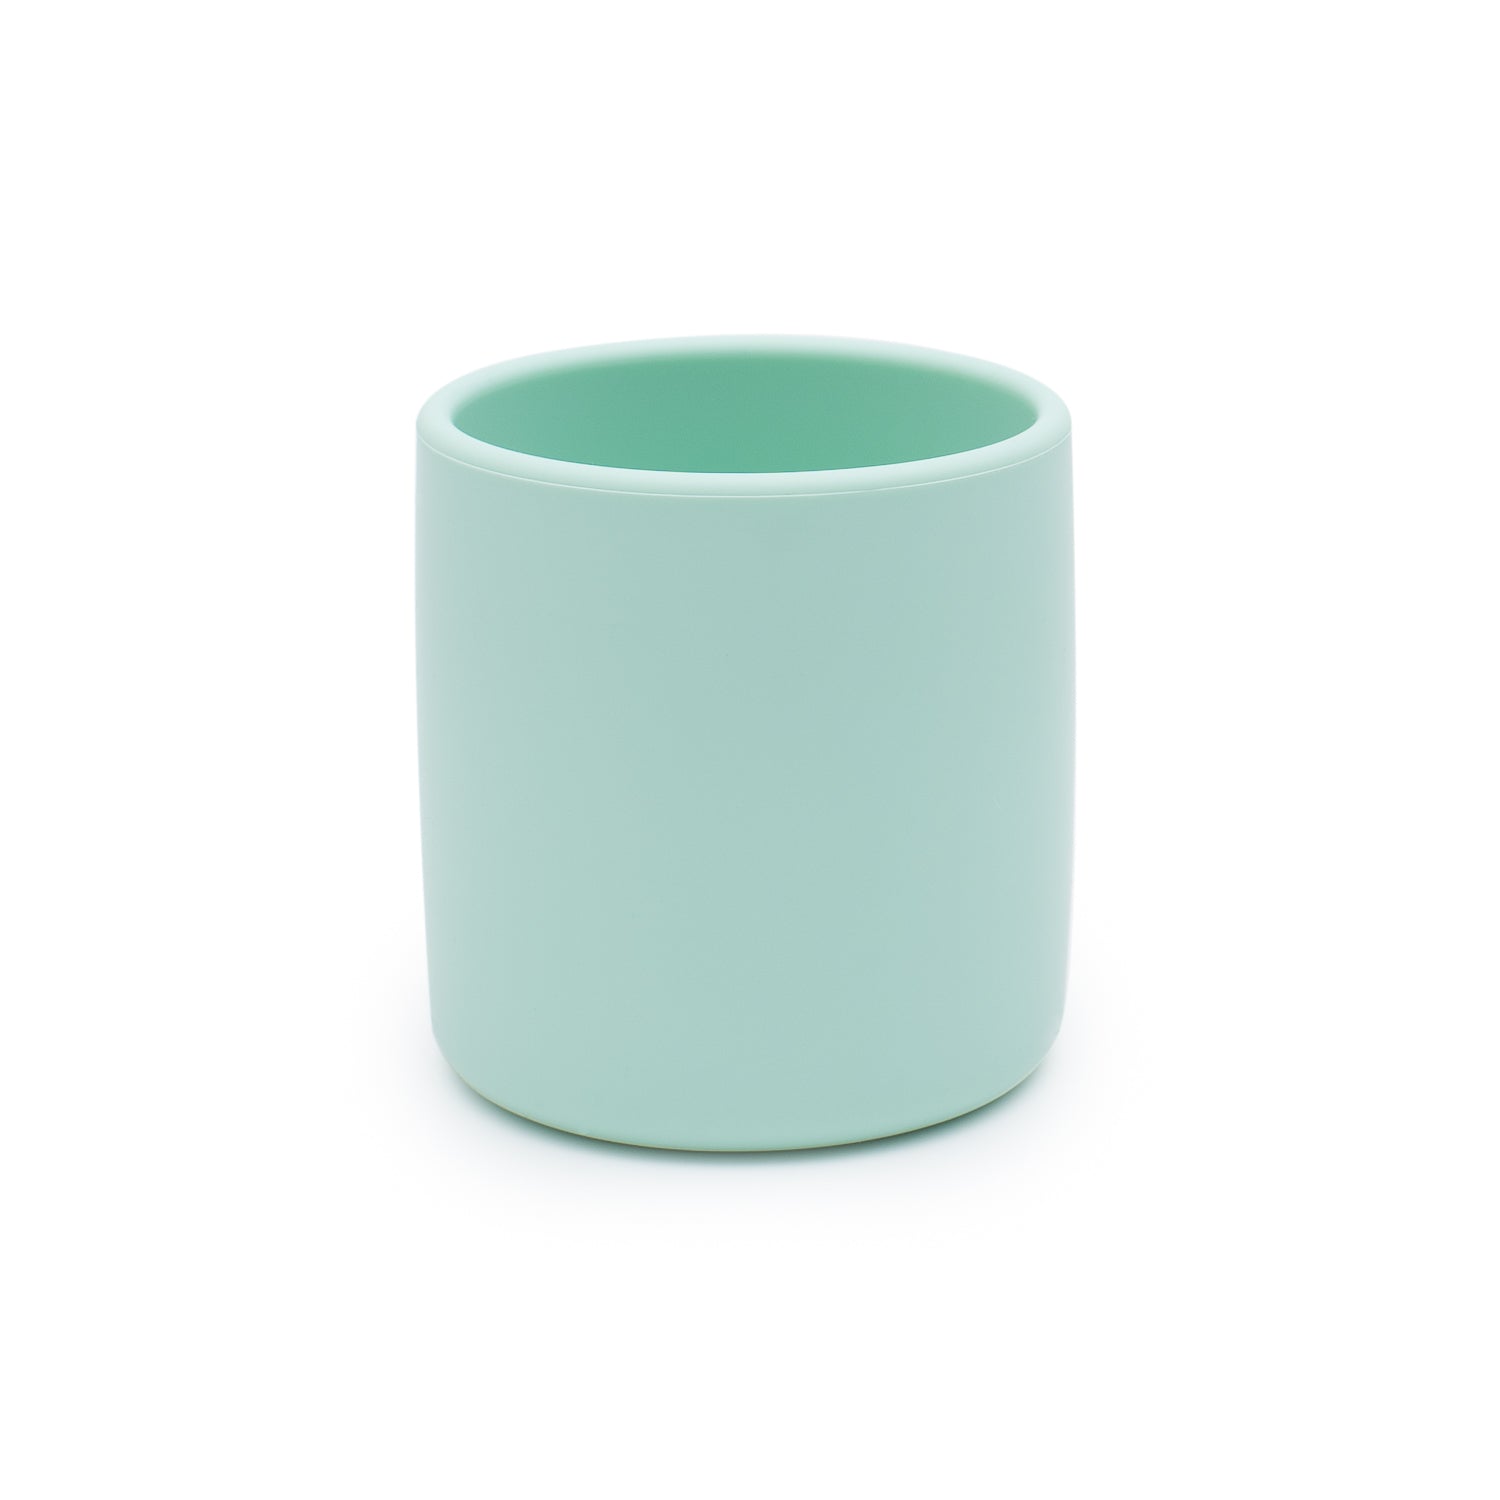 Grip cup - Minty green